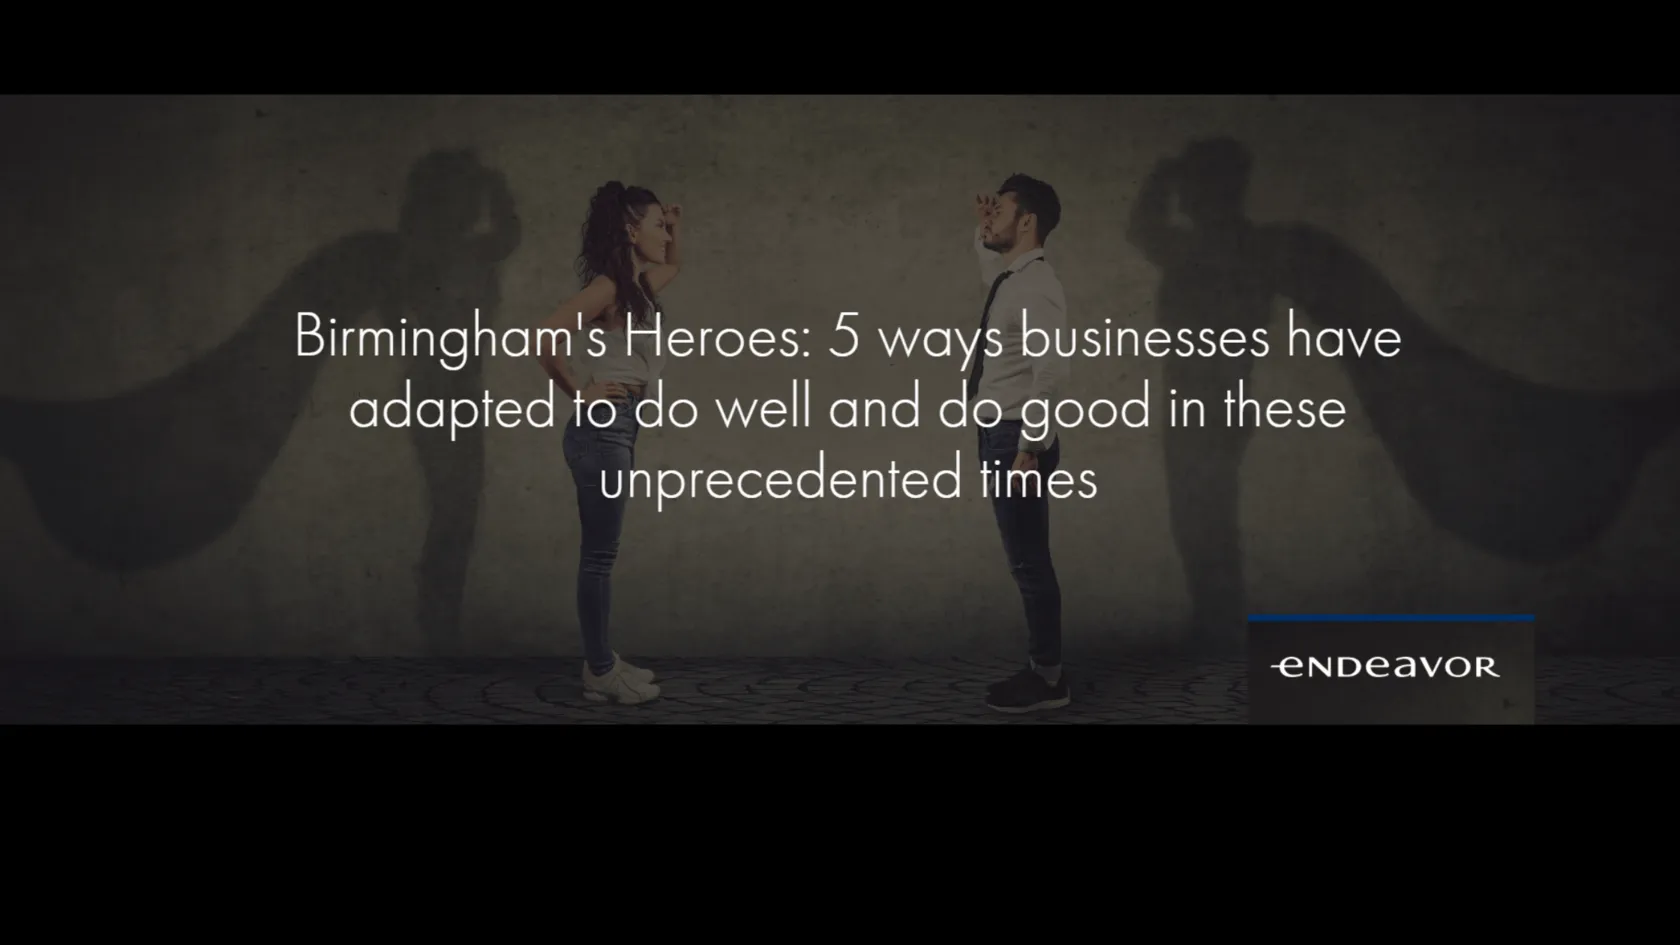 You are currently viewing Birmingham’s Heroes: 5 ways businesses have adapted to do well and do good in these unprecedented times